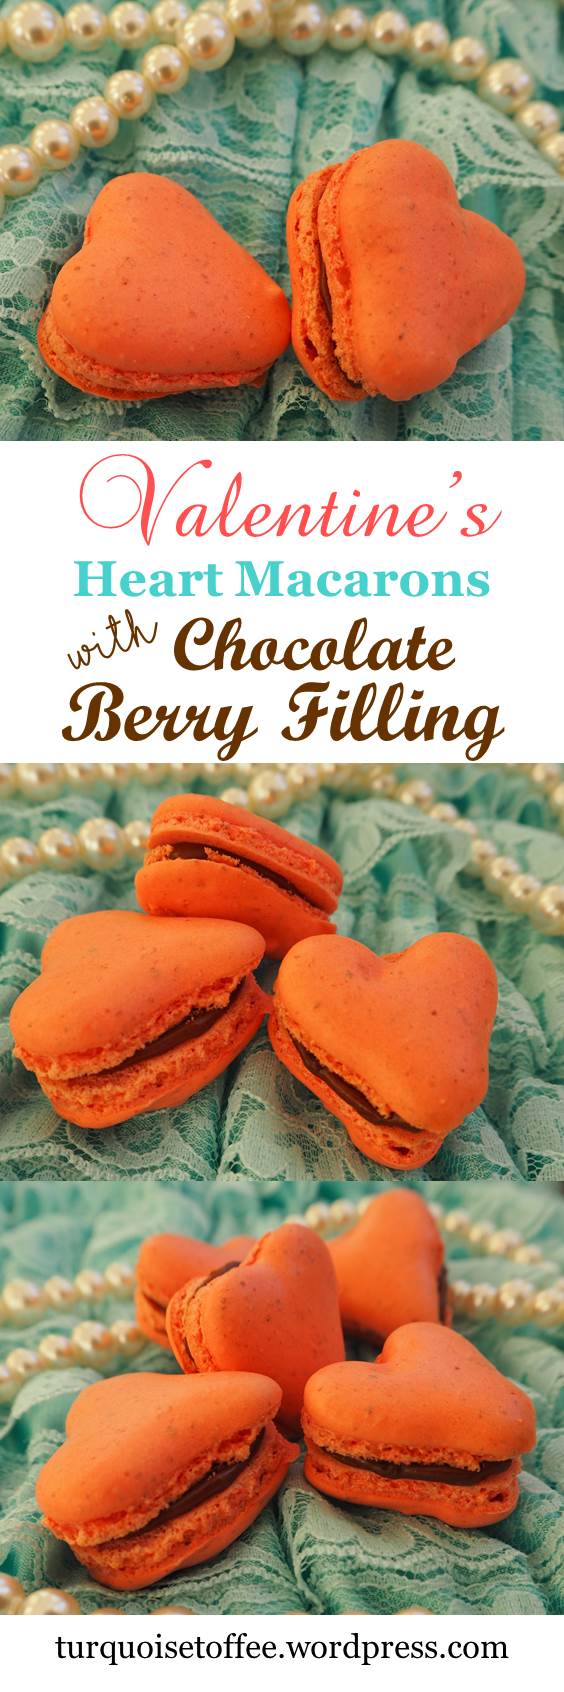 Valentine's Heart Macarons with Chocolate Berry Filling Turquoise